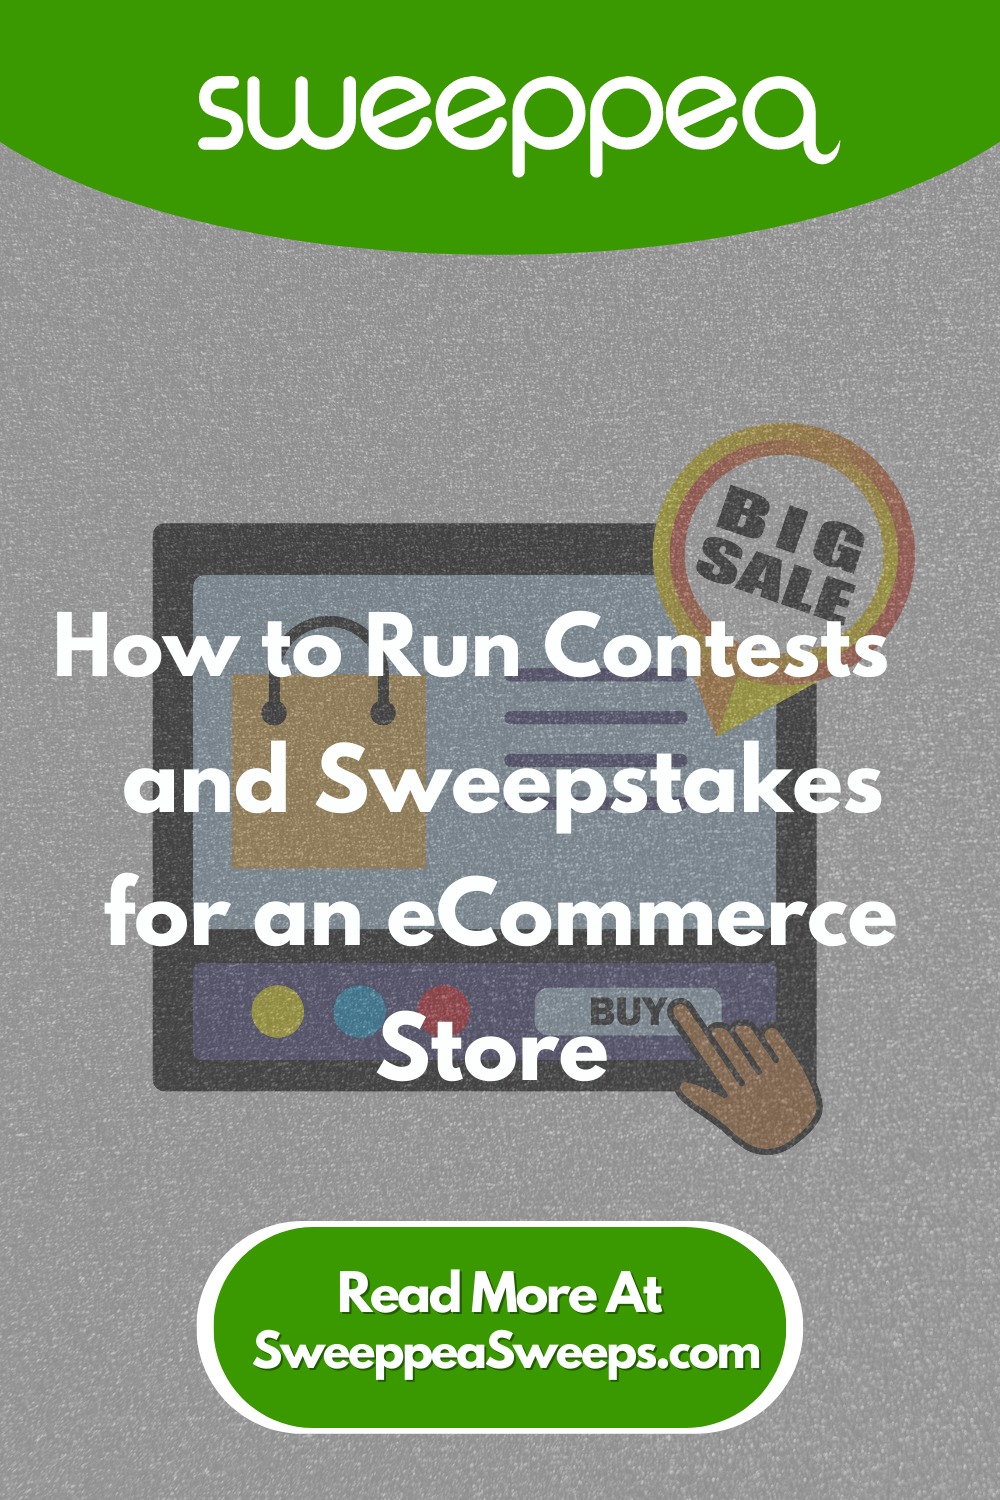 How to run contests and sweepstakes for an ecommerce store